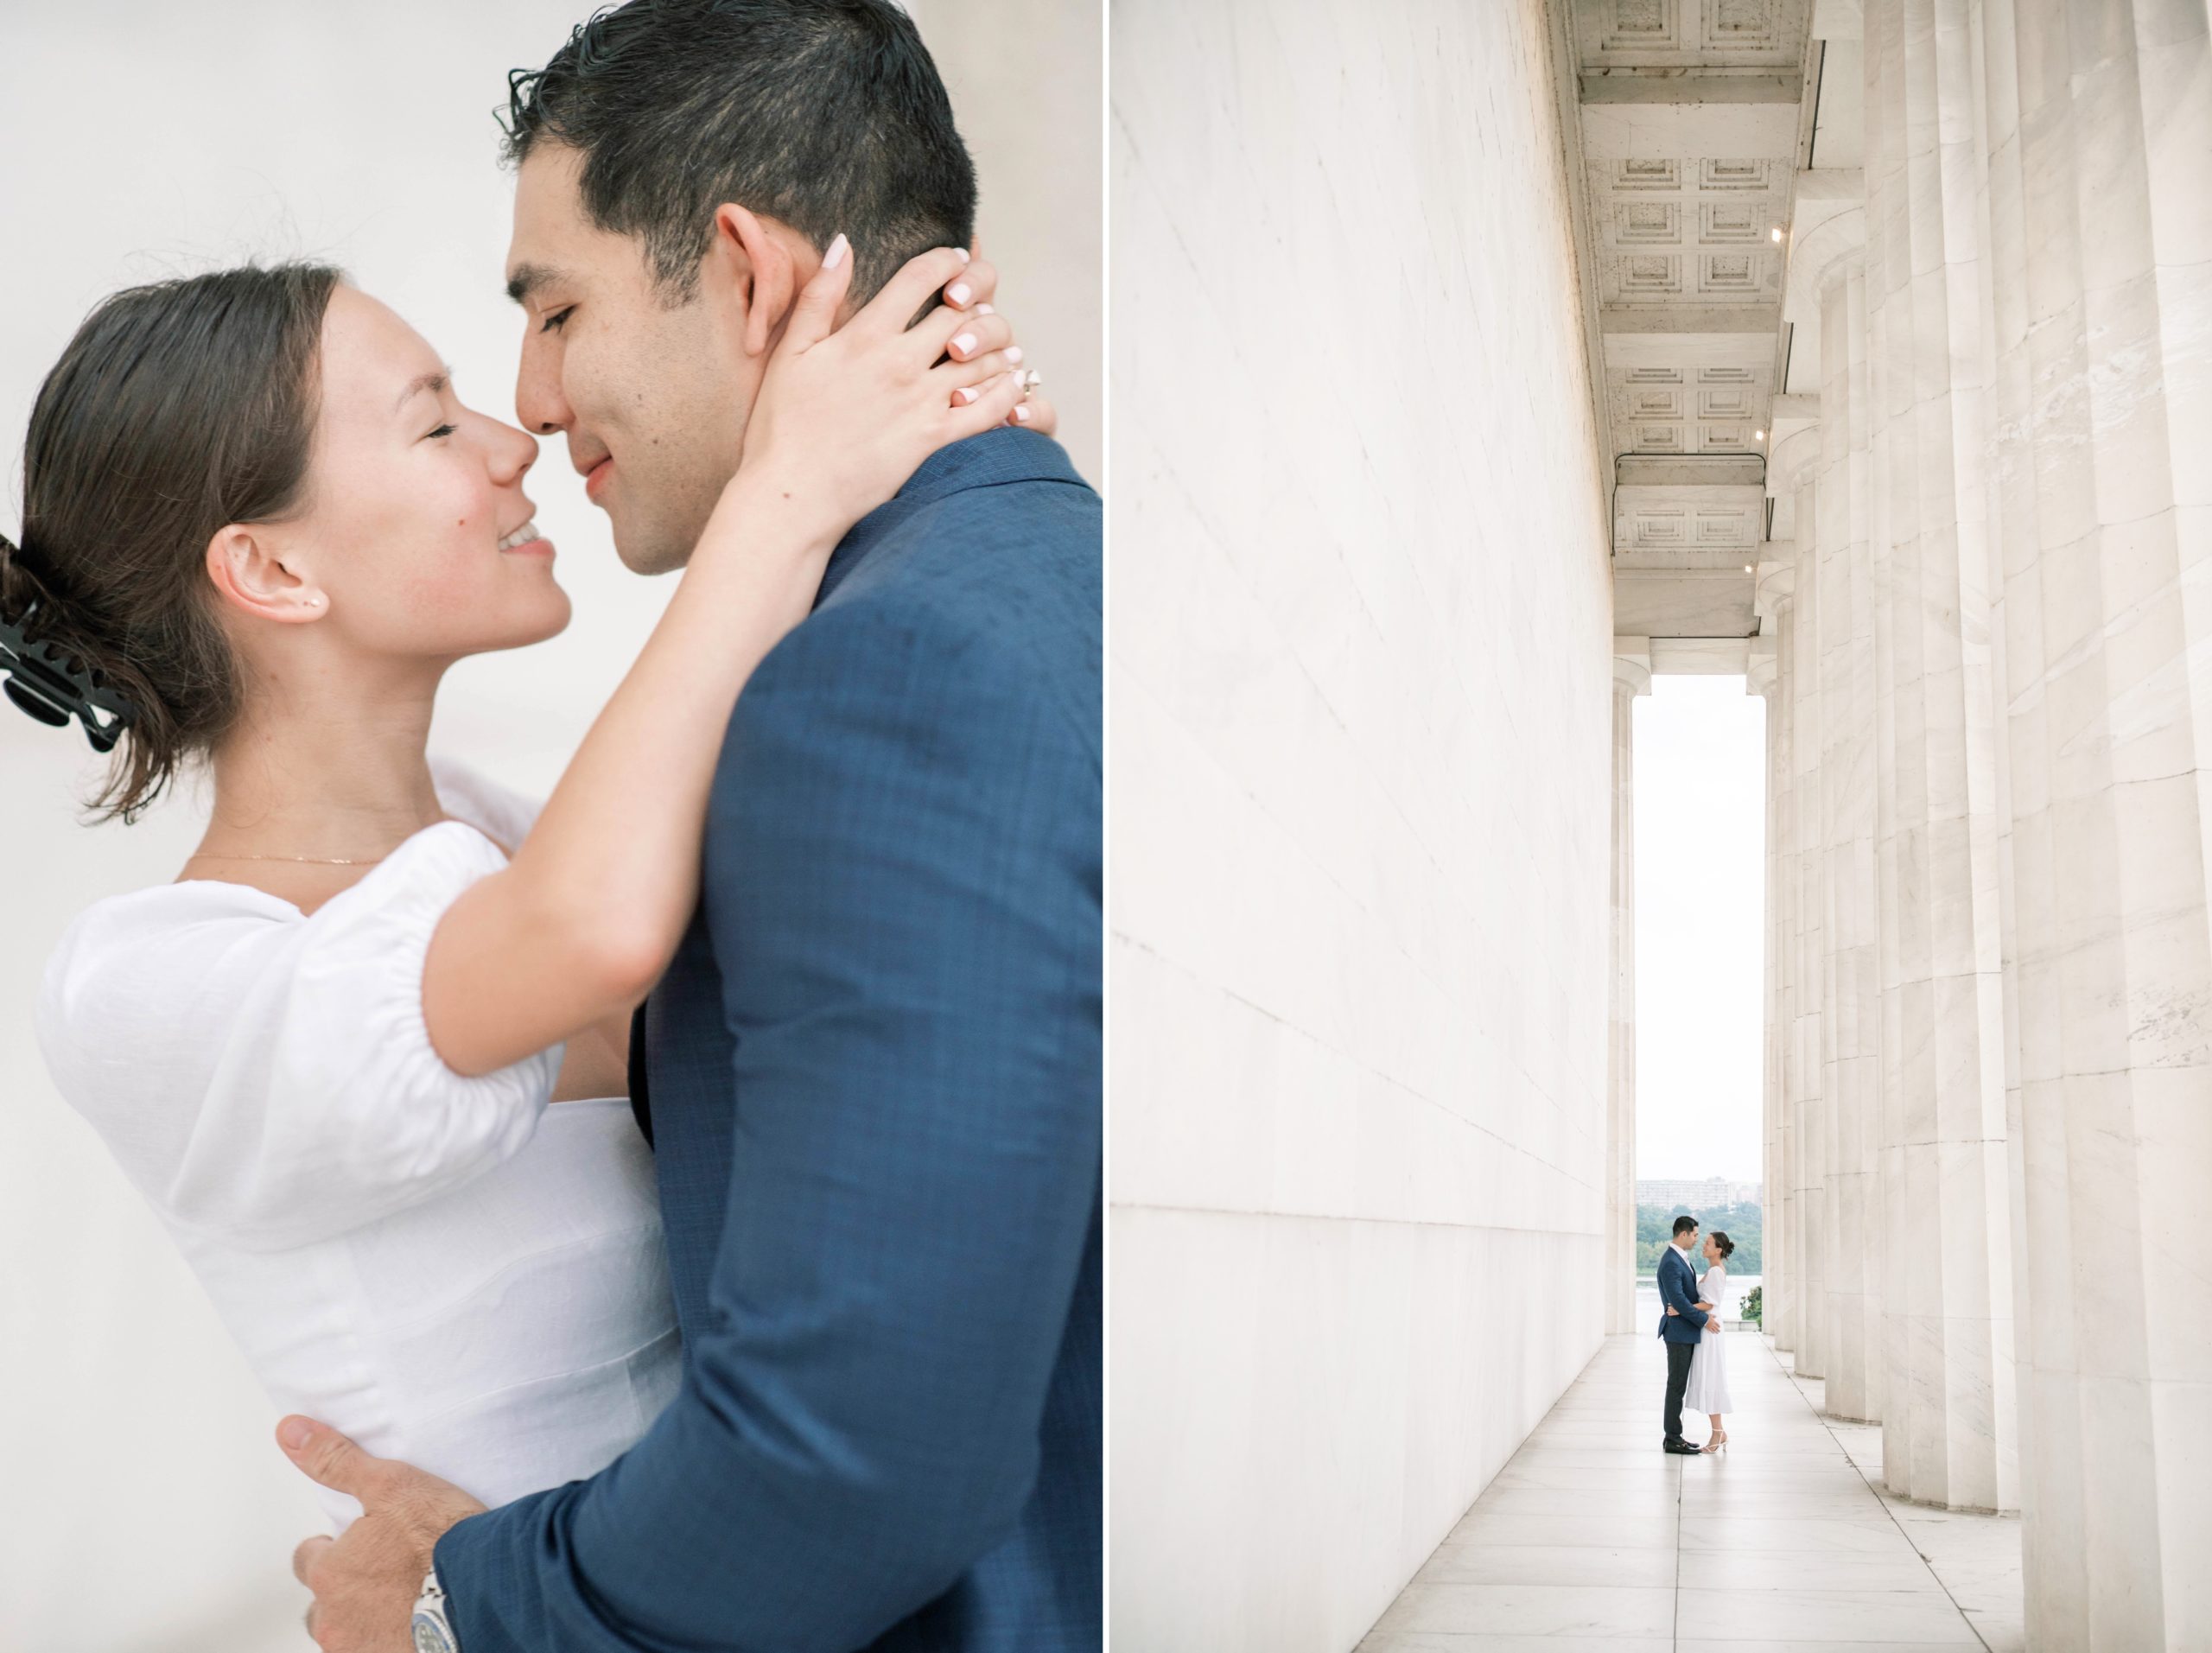 An stylish sunrise engagement session at the Lincoln Memorial on an overcast morning in Washington, DC.